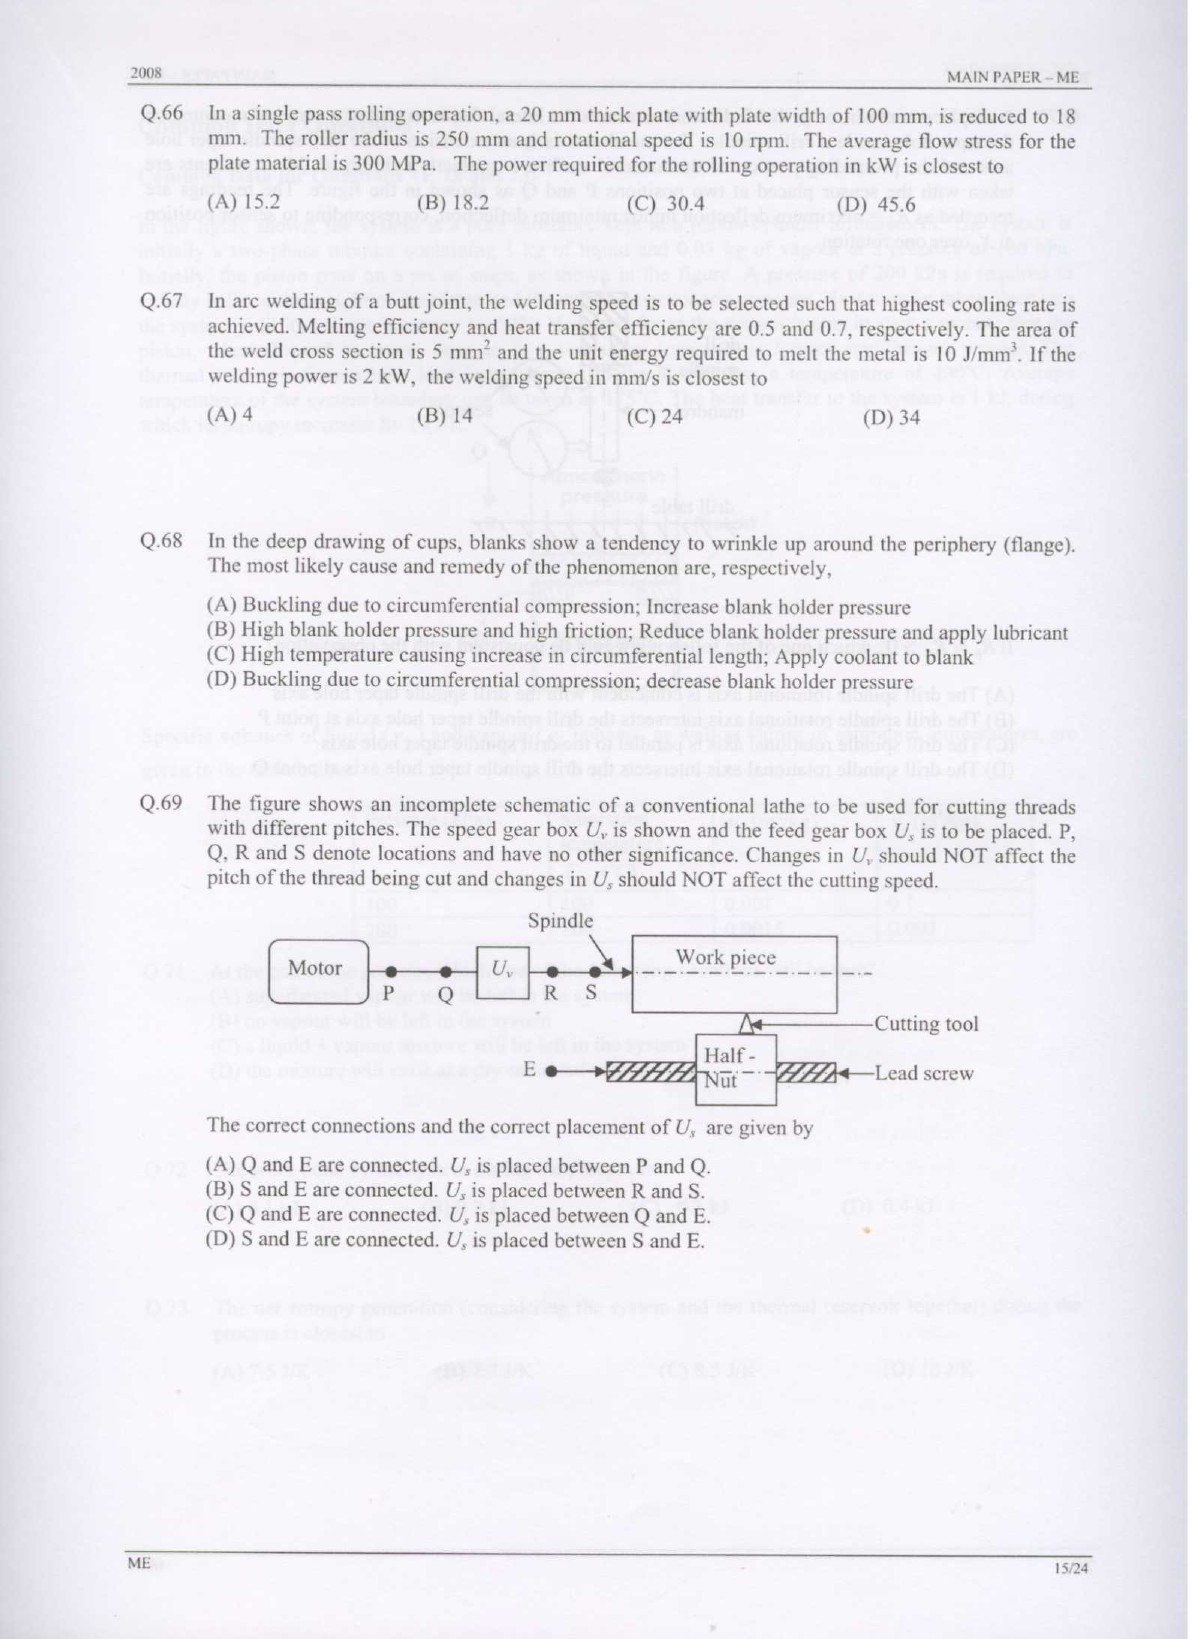 GATE Exam Question Paper 2008 Mechanical Engineering 15